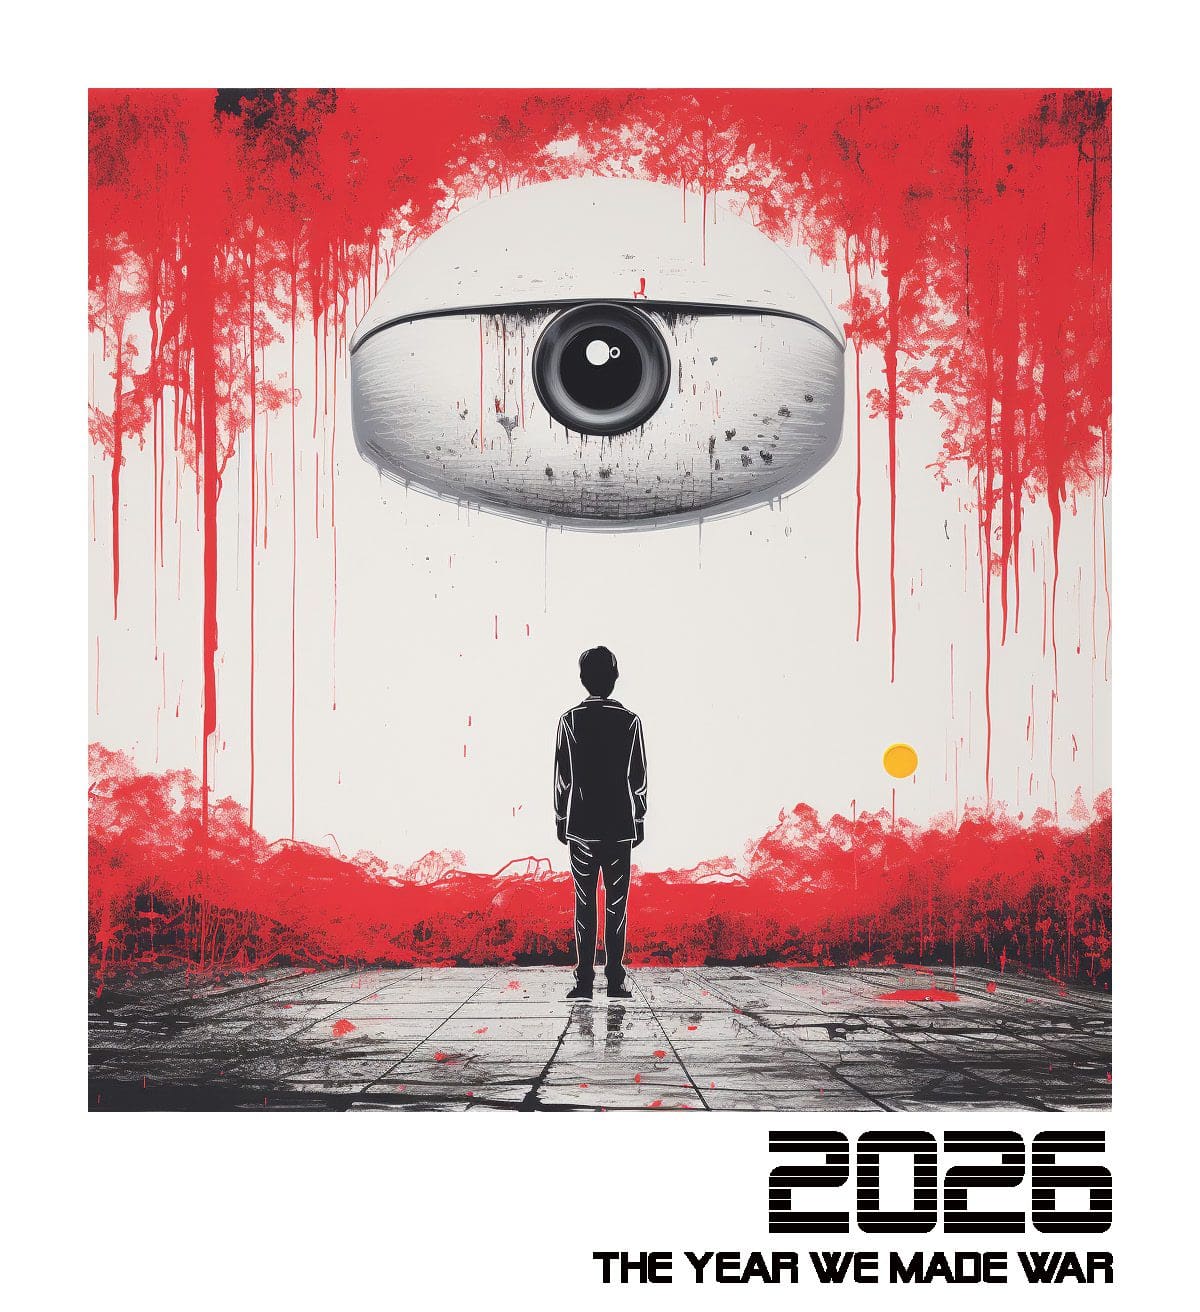 2026 The Year We Made War. A person in a black suit standing alone with their back to us, looking at a wall covered in dripping blood, with a large open robotic eye.